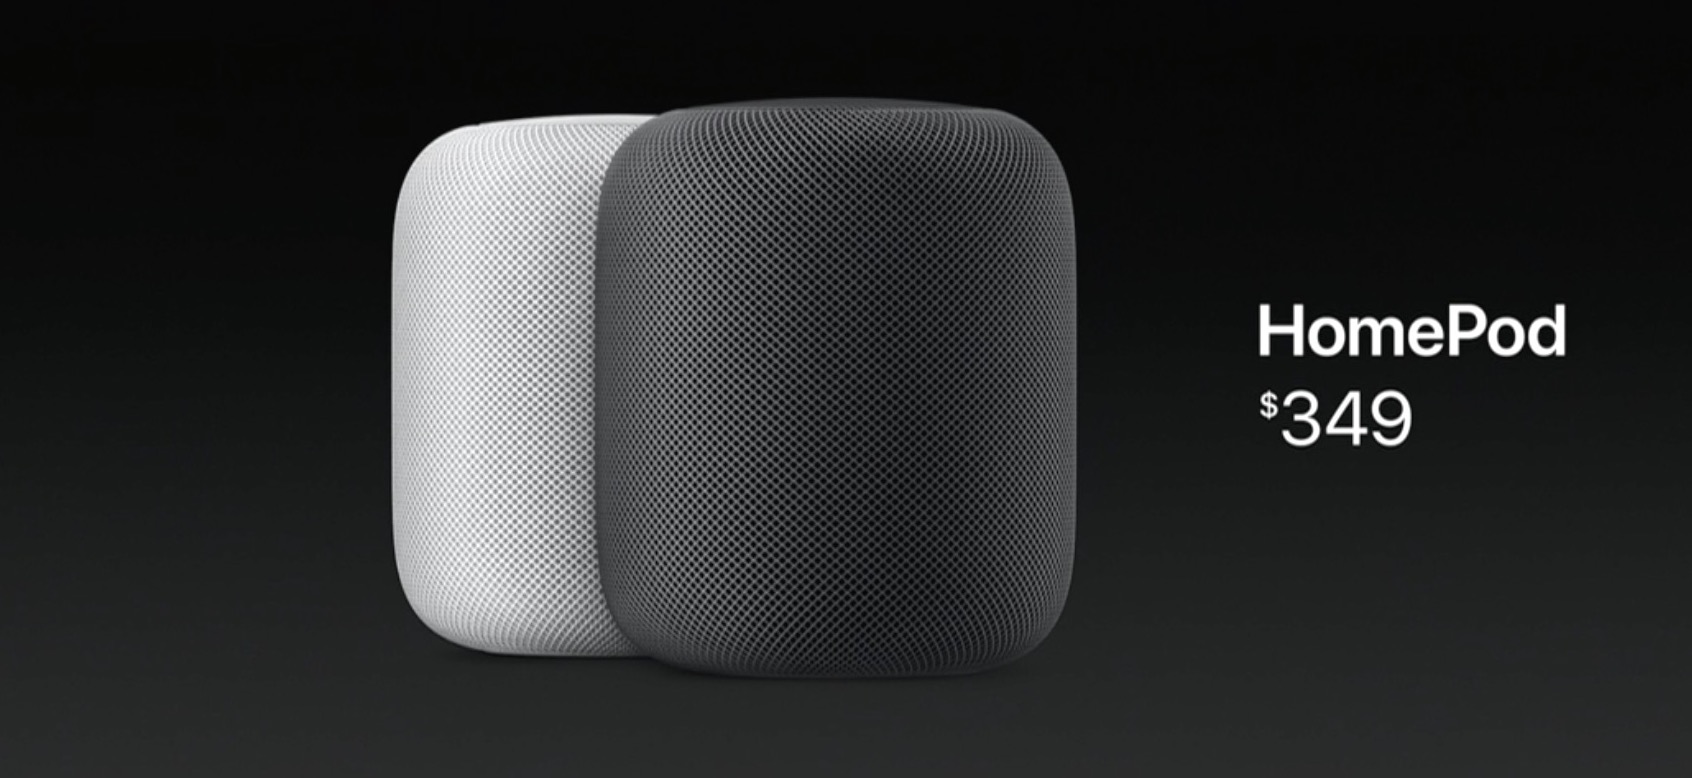 homepod-pricing